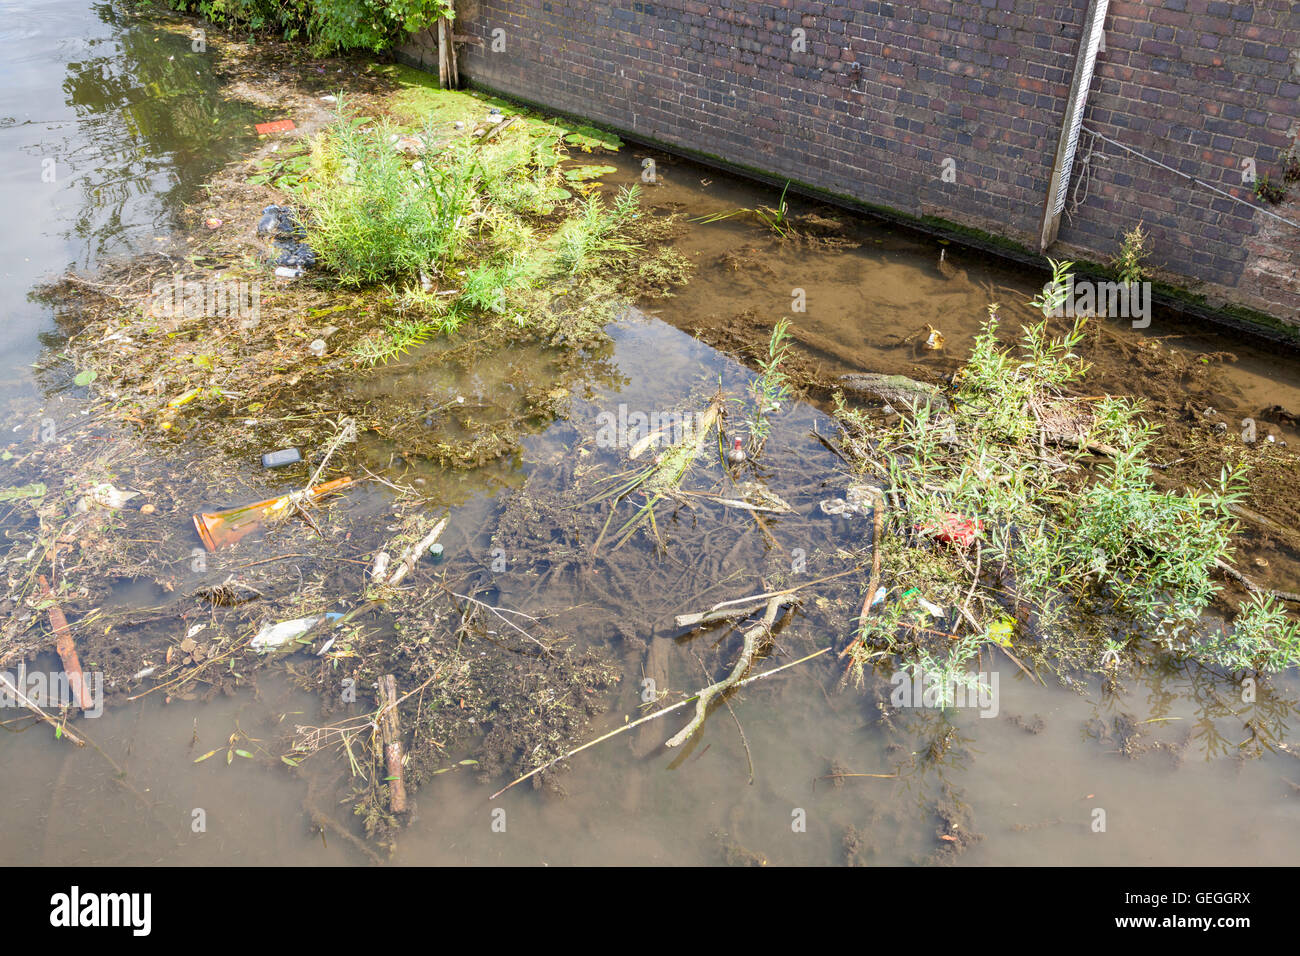 Water pollution. Rubbish in the disused and overgrown Grantham Canal, West Bridgford, Nottinghamshire, England, UK Stock Photo